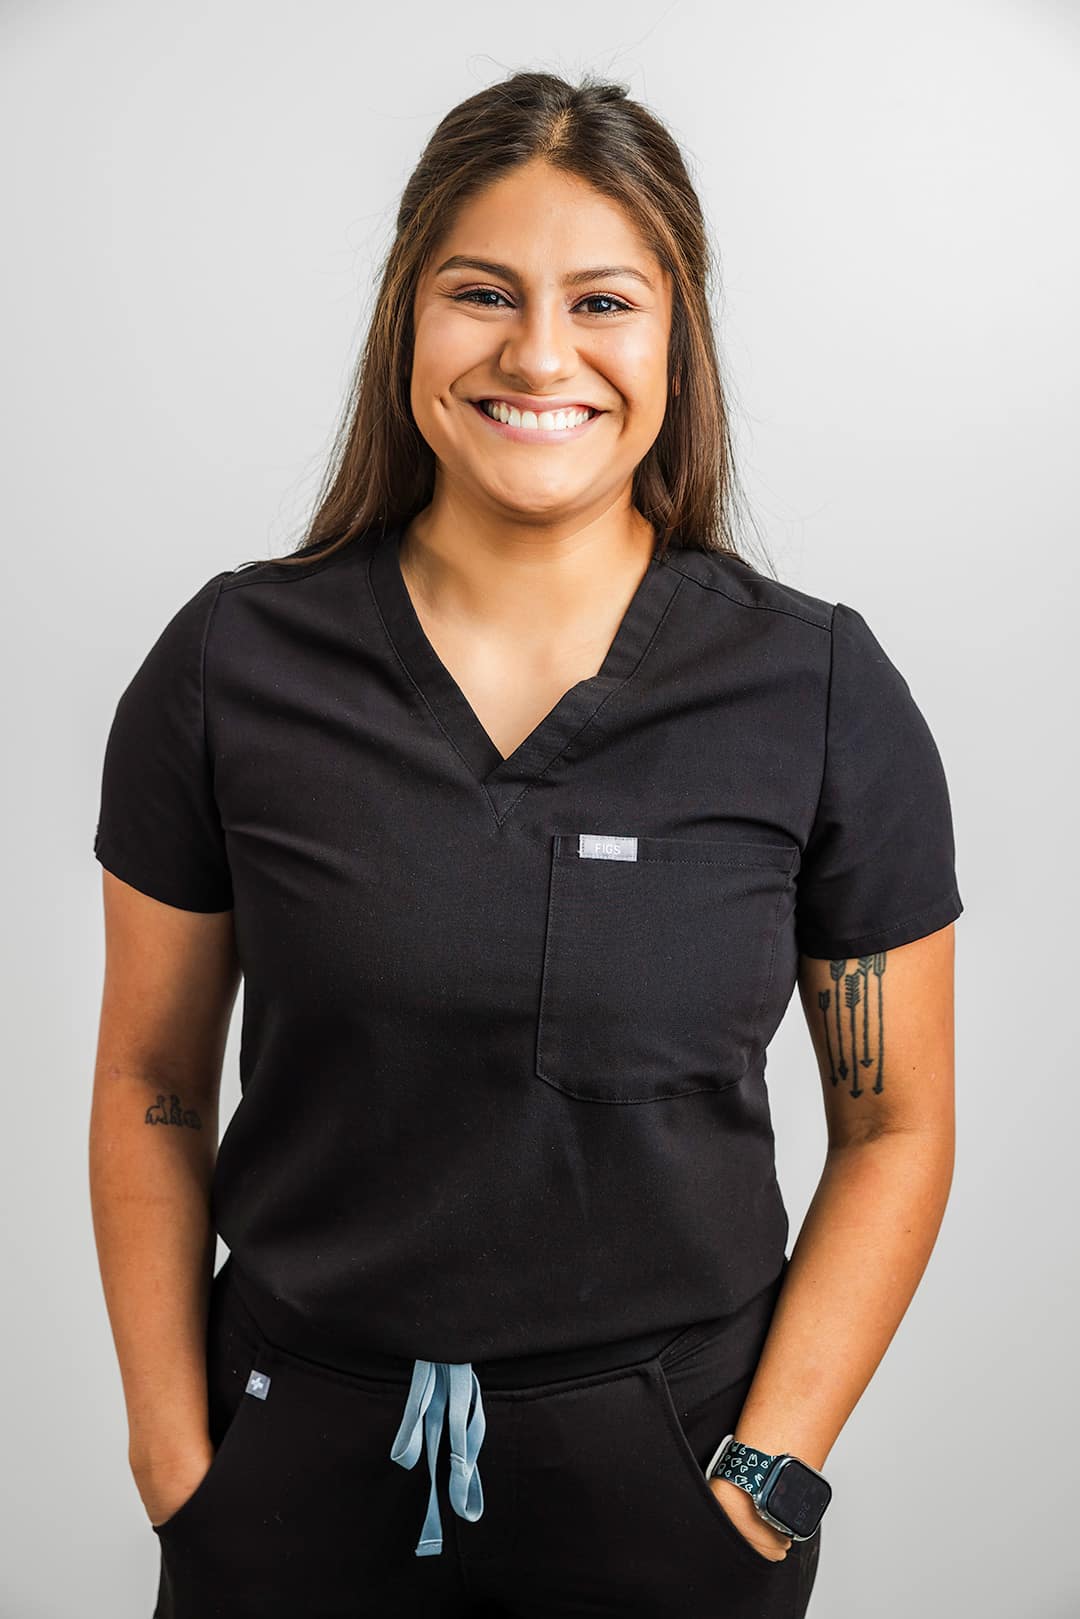 headshot of Maritza Huerta the Office Manager, and Treatment Coordinator at Dentistry on Monroe